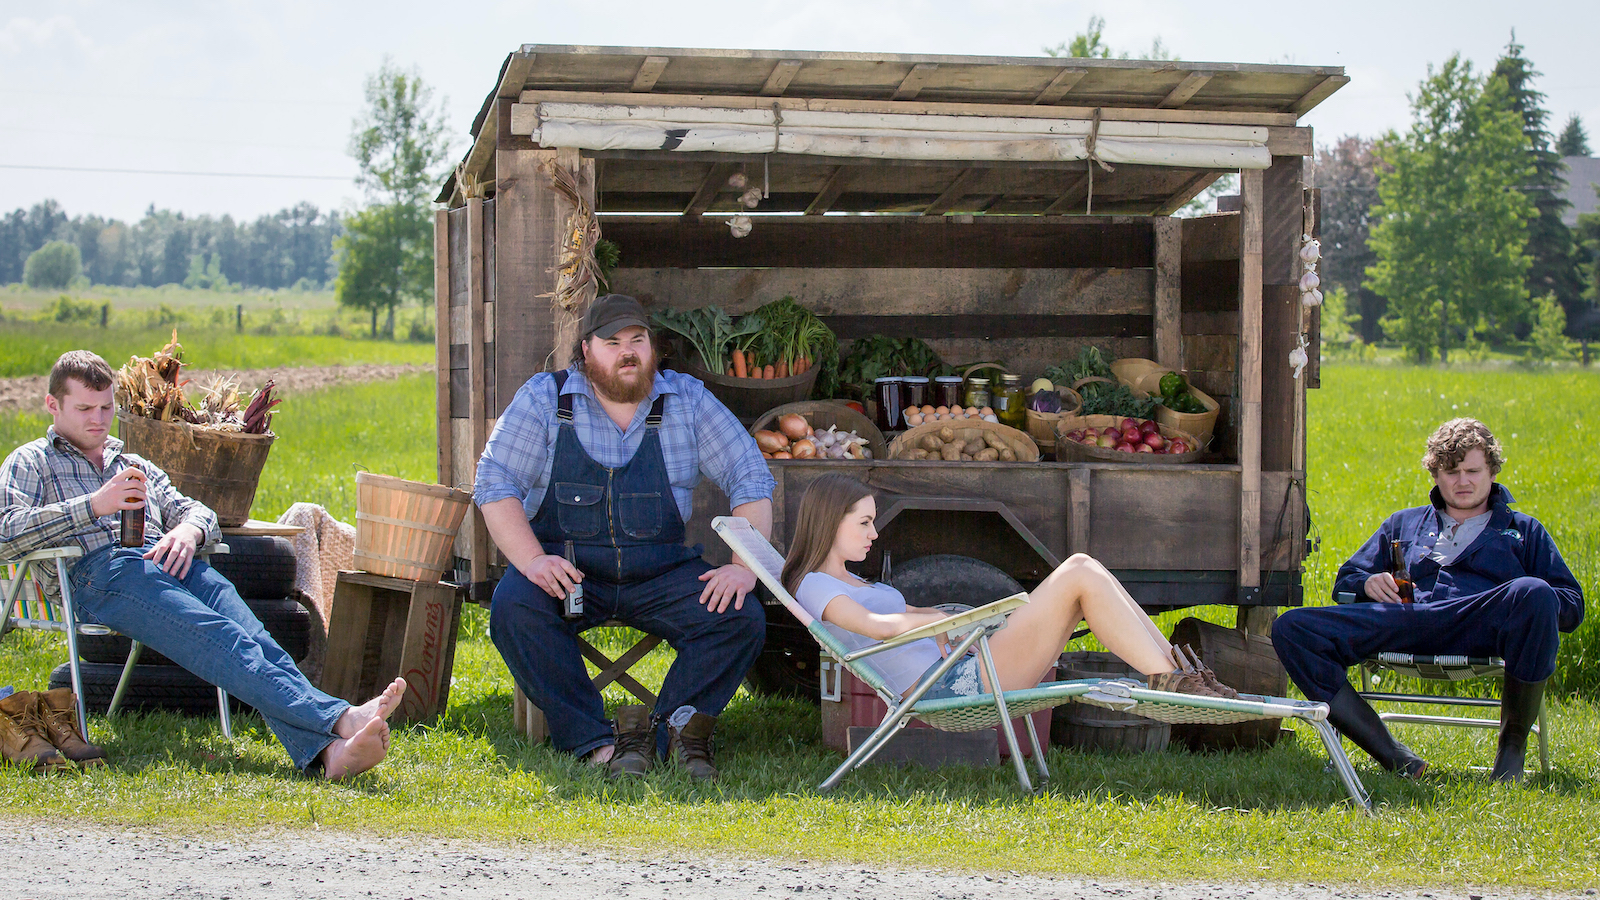 The Brutally Funny, Radically Moral World of 'Letterkenny' | by Cintra  Wilson | The New York Review of Books